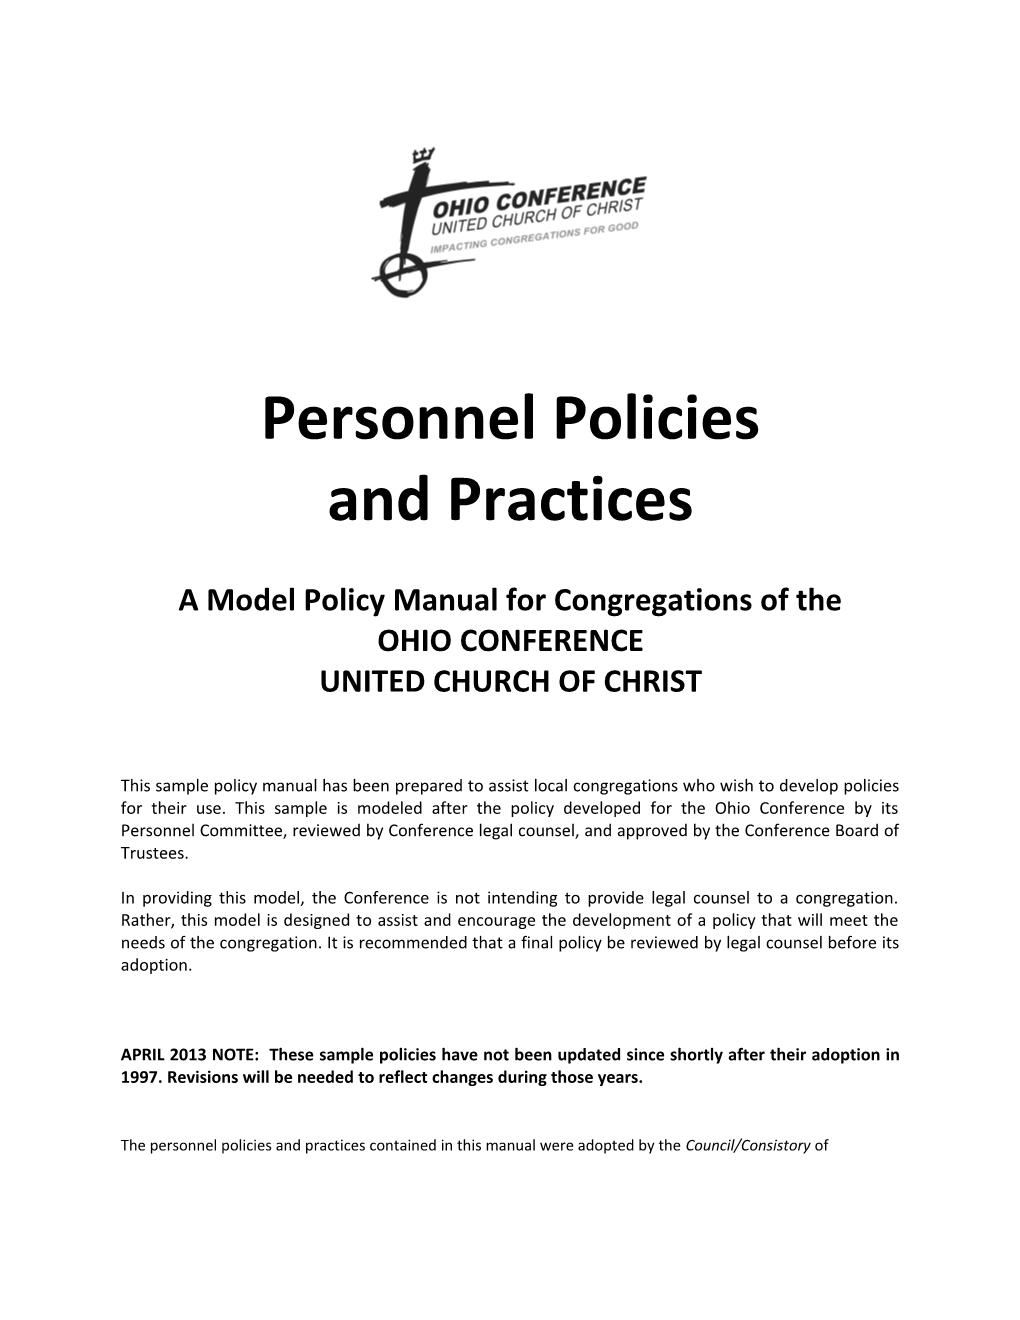 A Model Policy Manual for Congregations of The